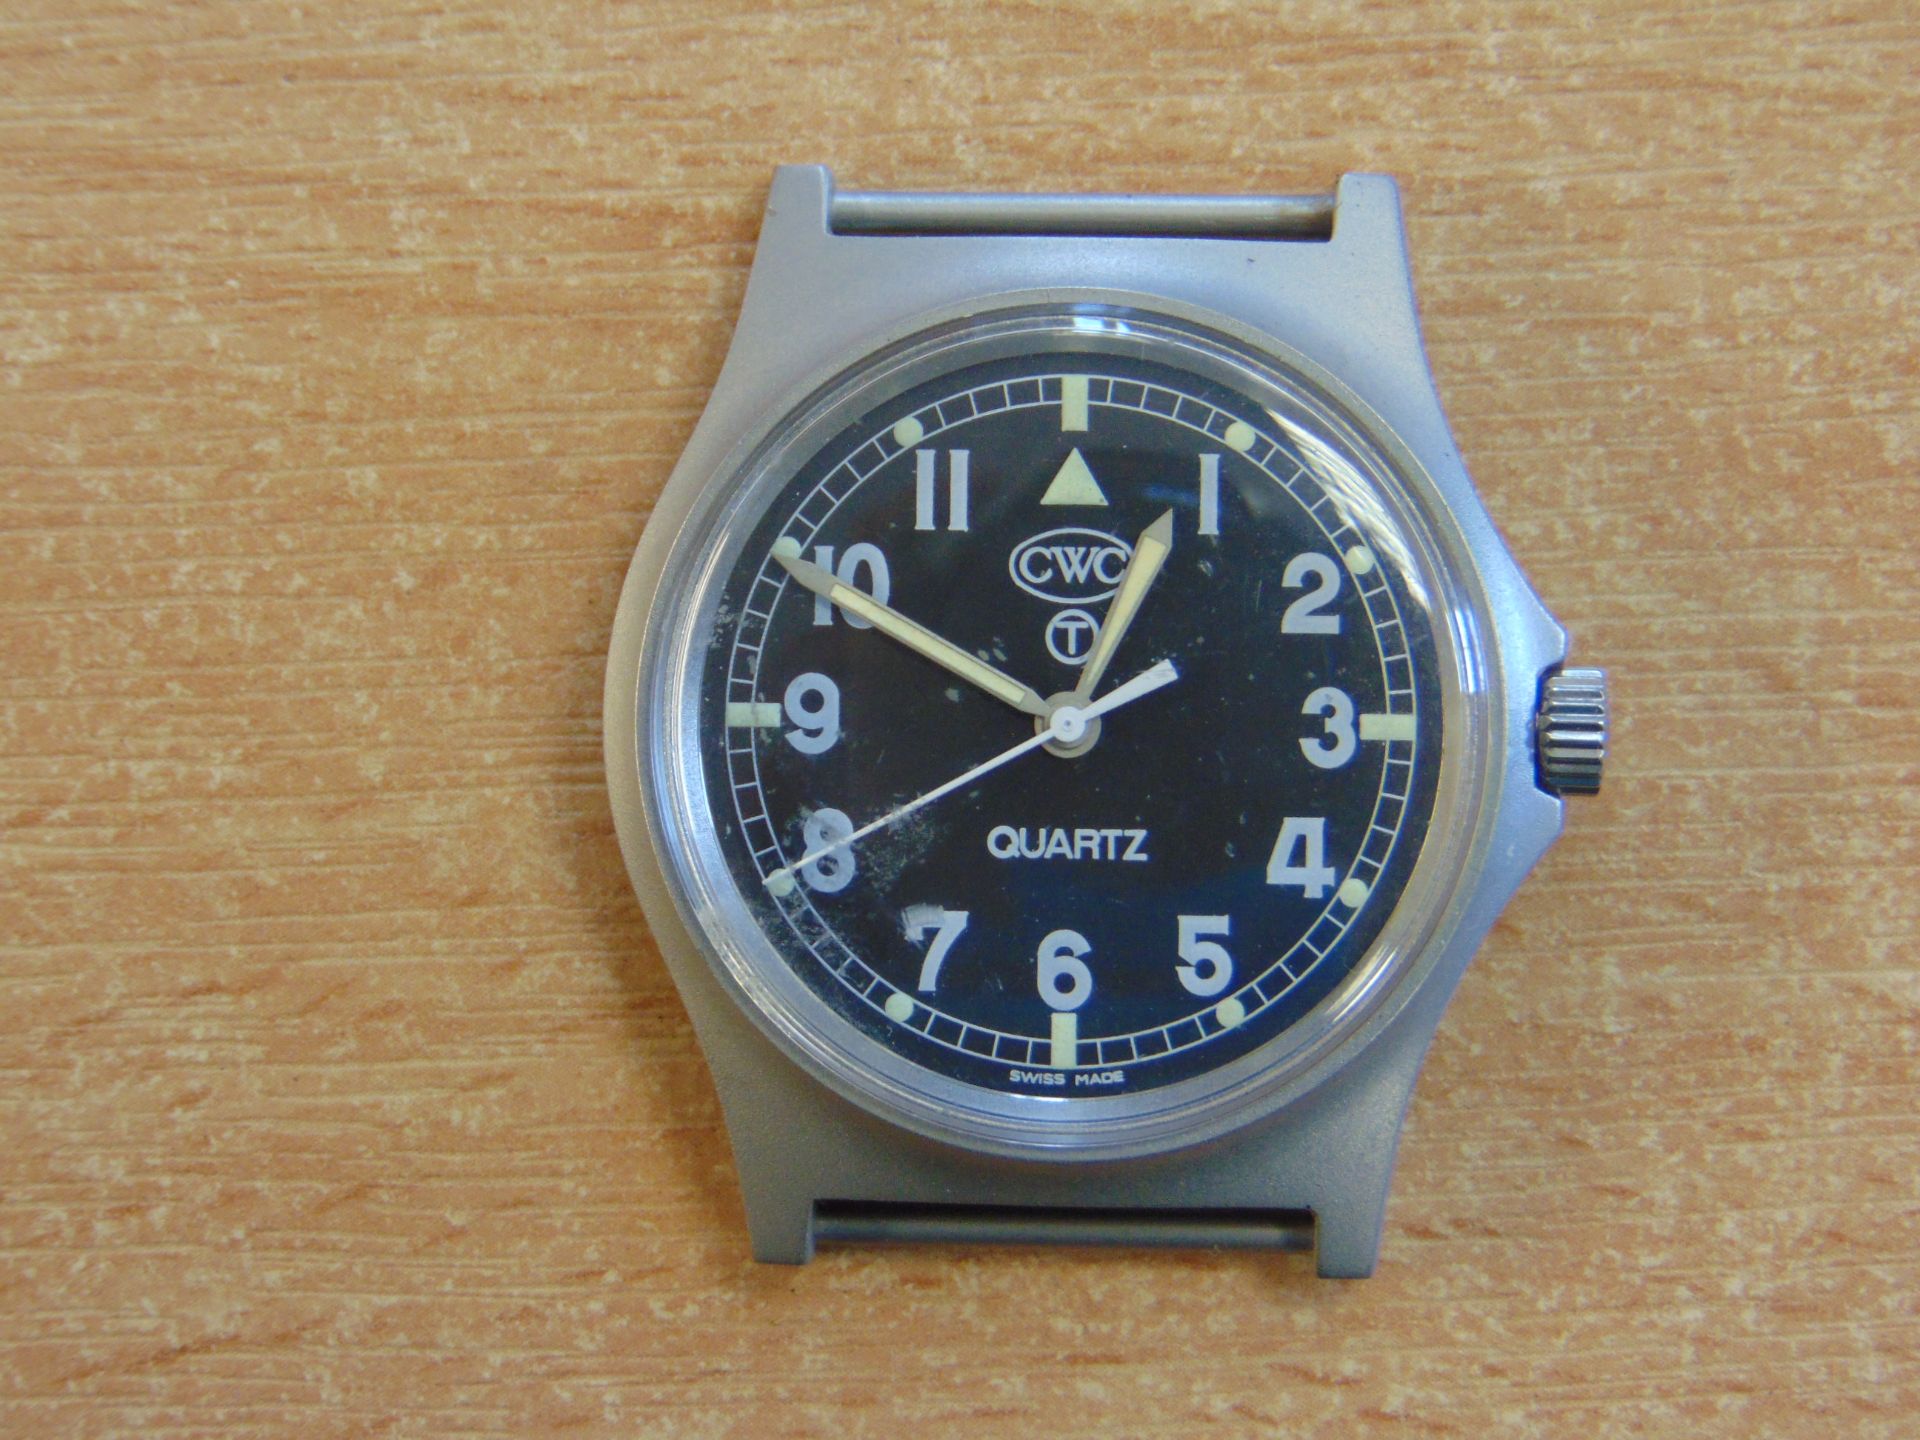 UNIQUE CWC 0552 ROYAL MARINES/ ROYAL NAVY ISSUE SERVICE WATCH DATED 1990 ** GULF WAR** SN.66054 - Image 4 of 9